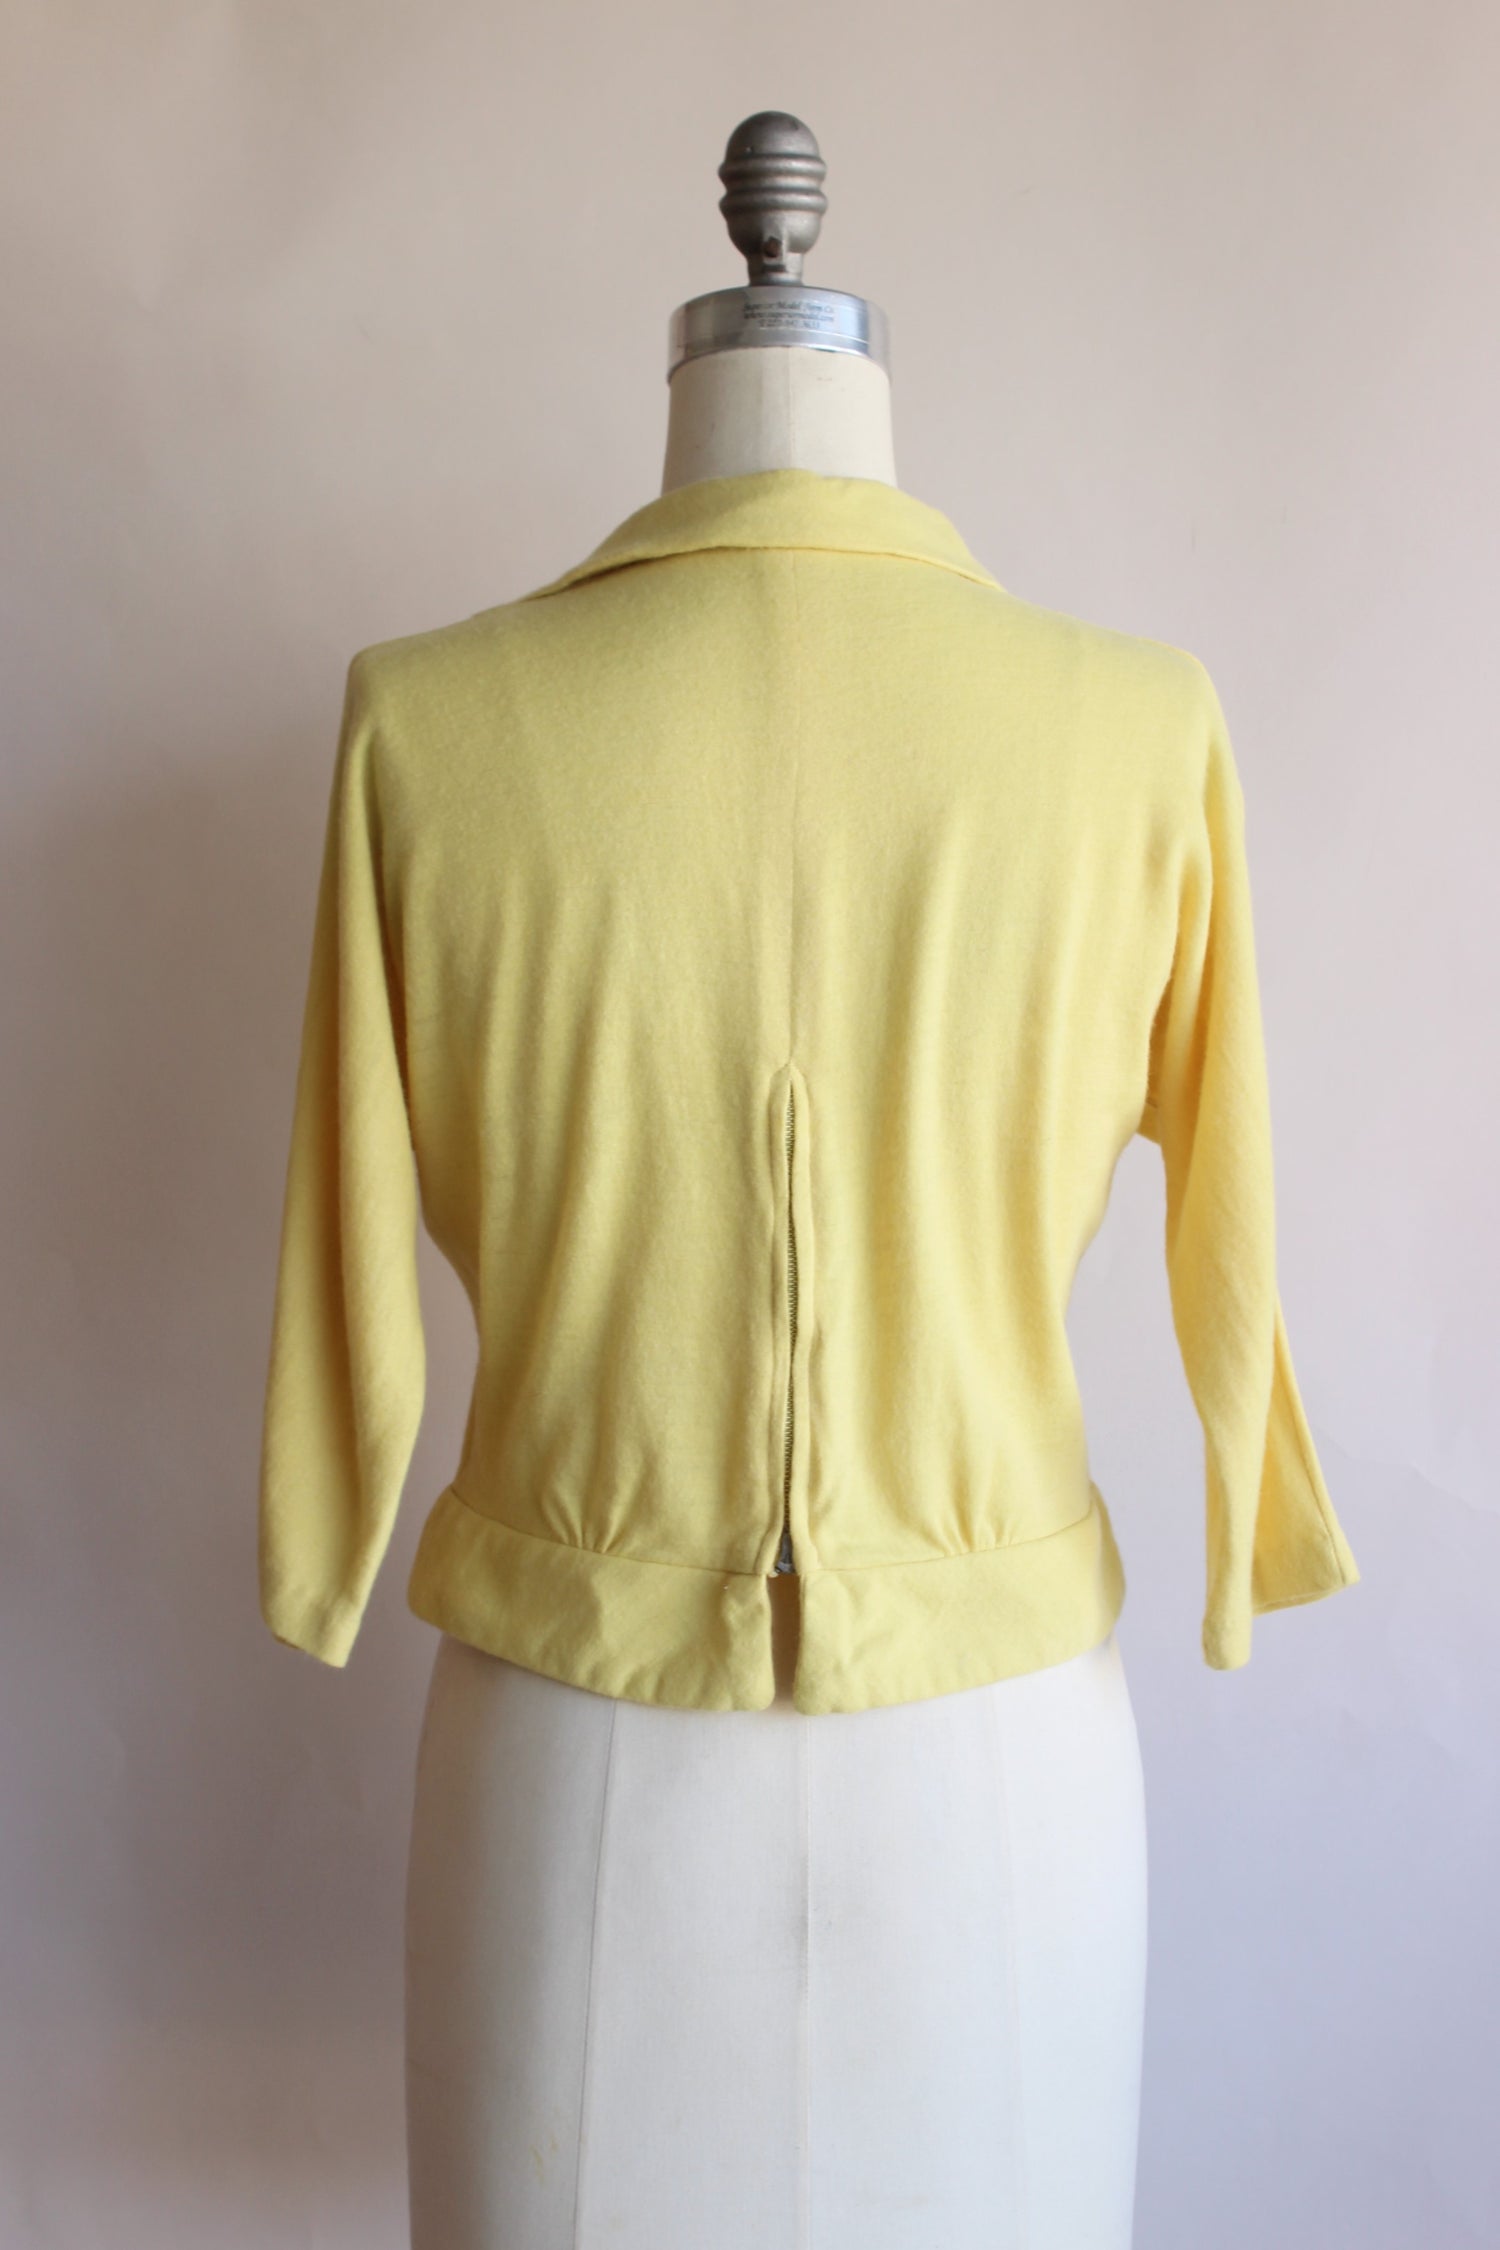 Vintage Late 1950s Yellow Blouse